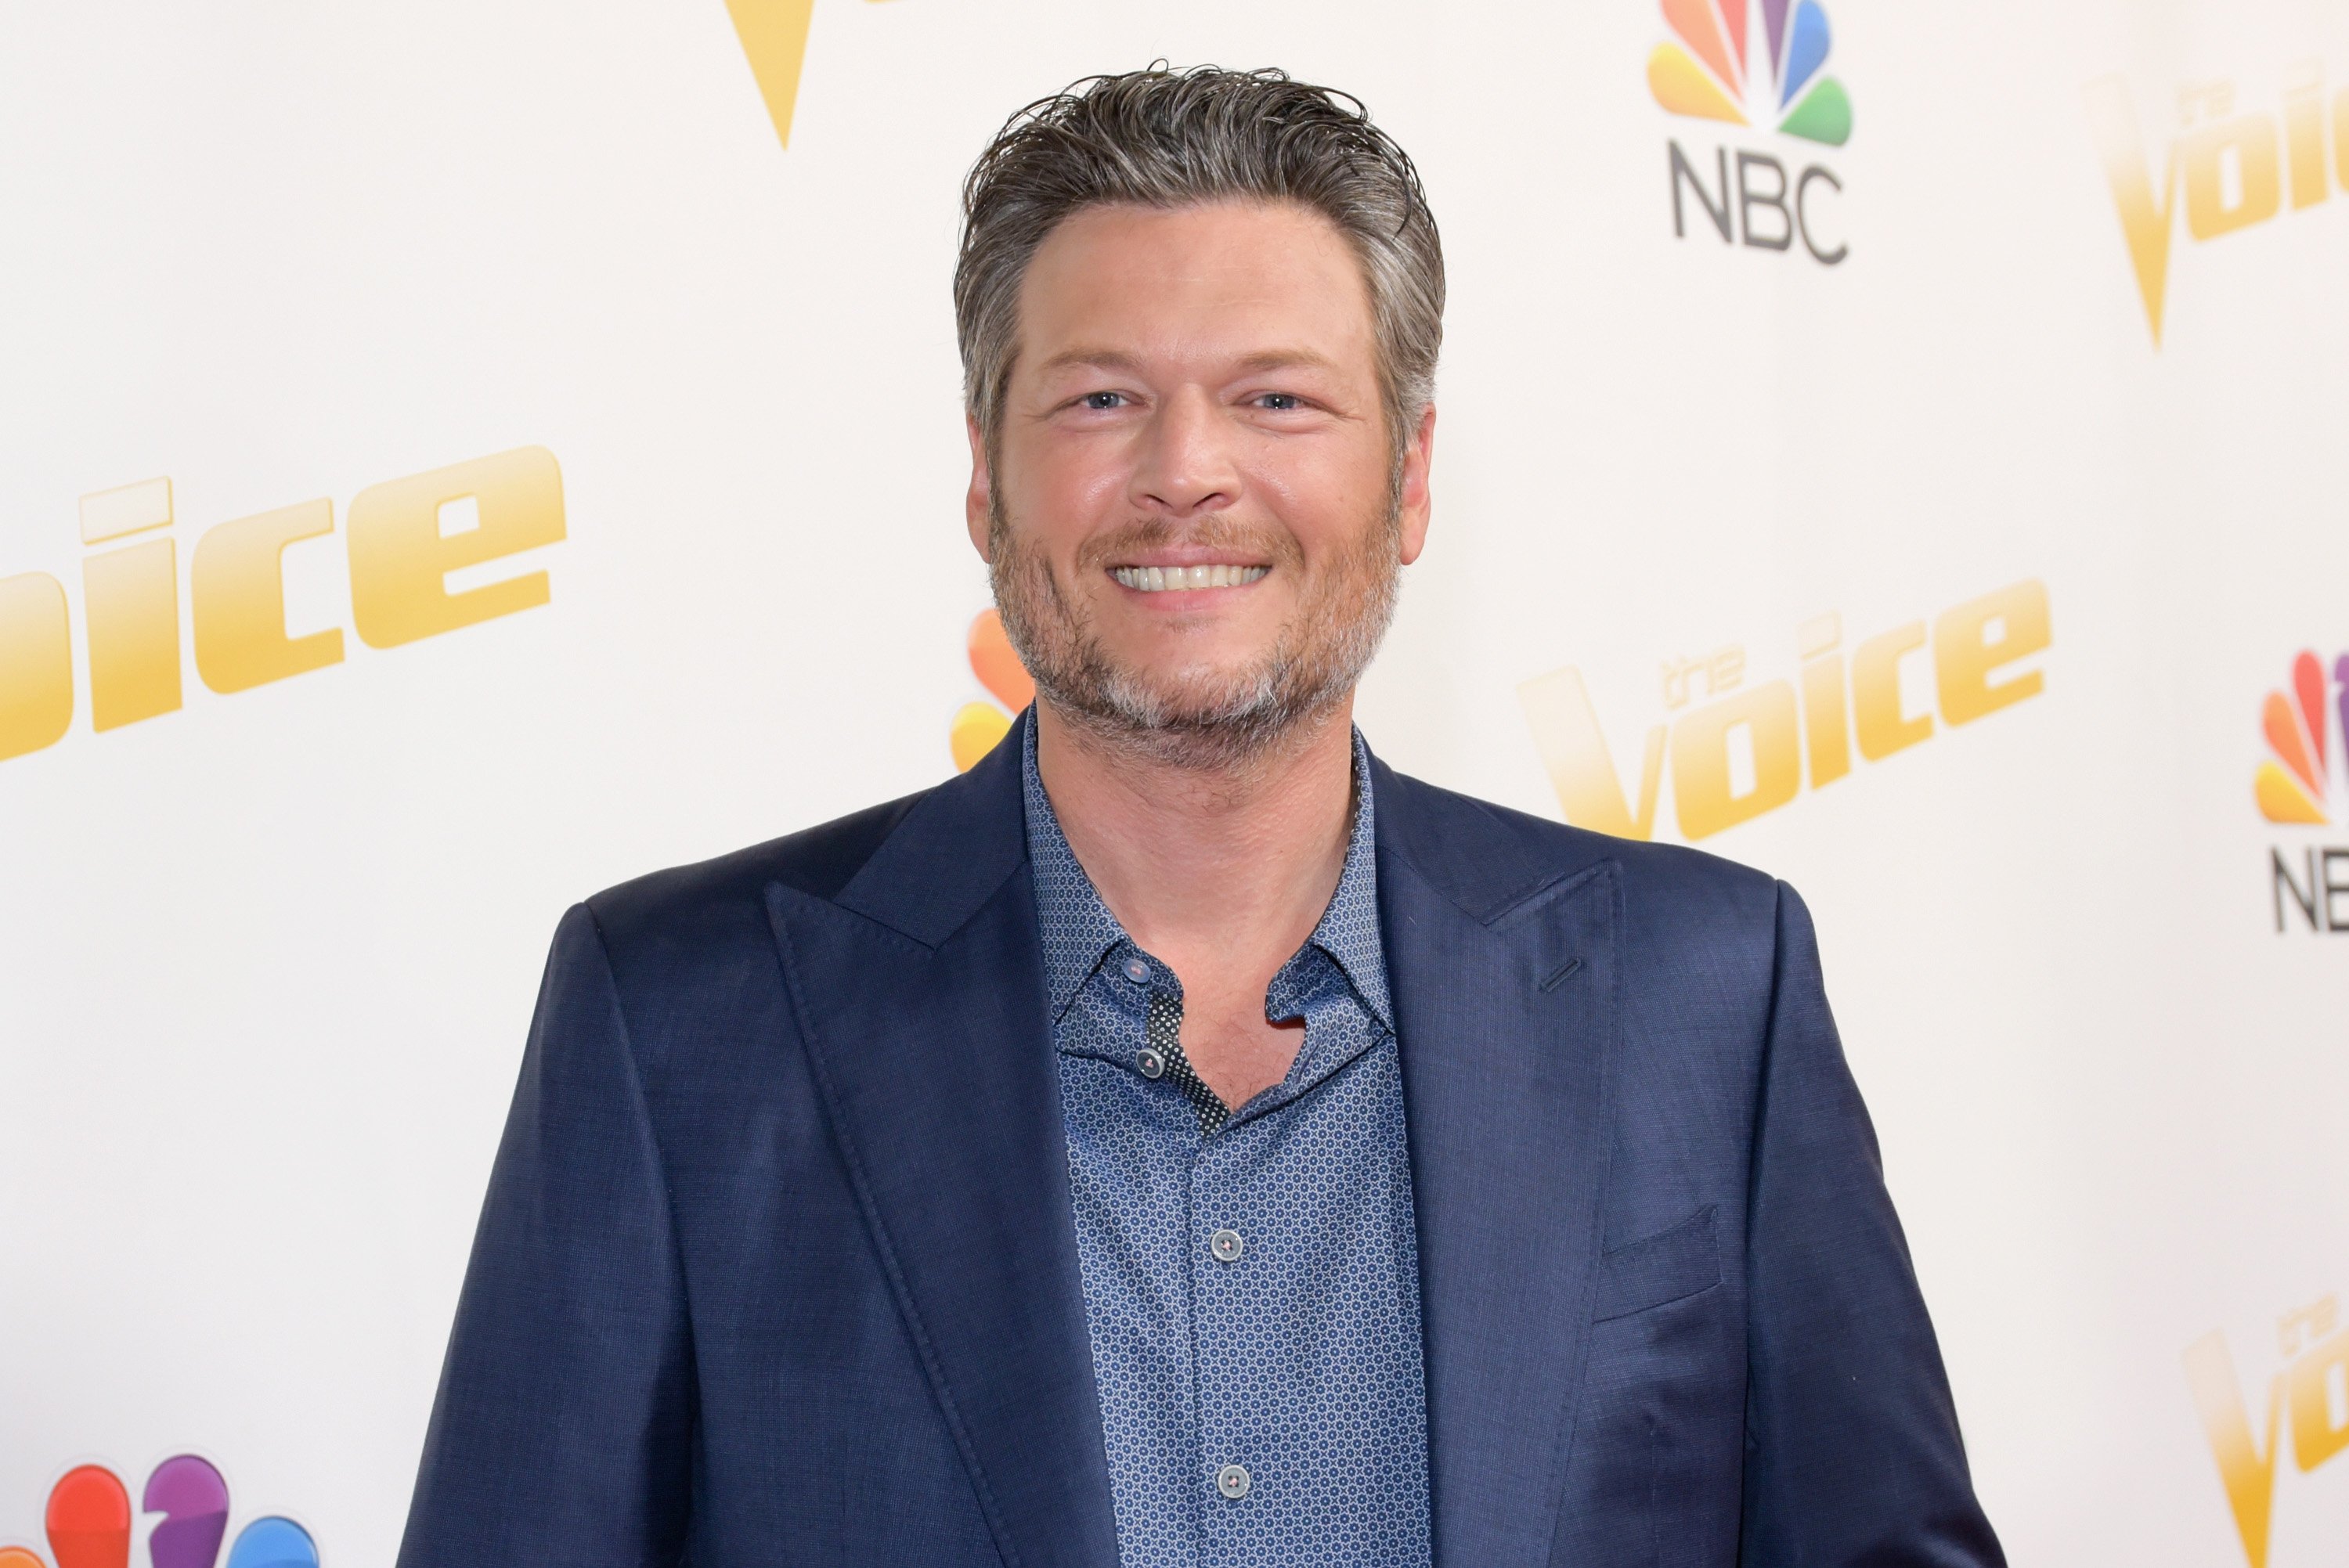 Blake Shelton attends NBC's 'The Voice' Season 14 taping on April 23, 2018 | Photo: GettyImages